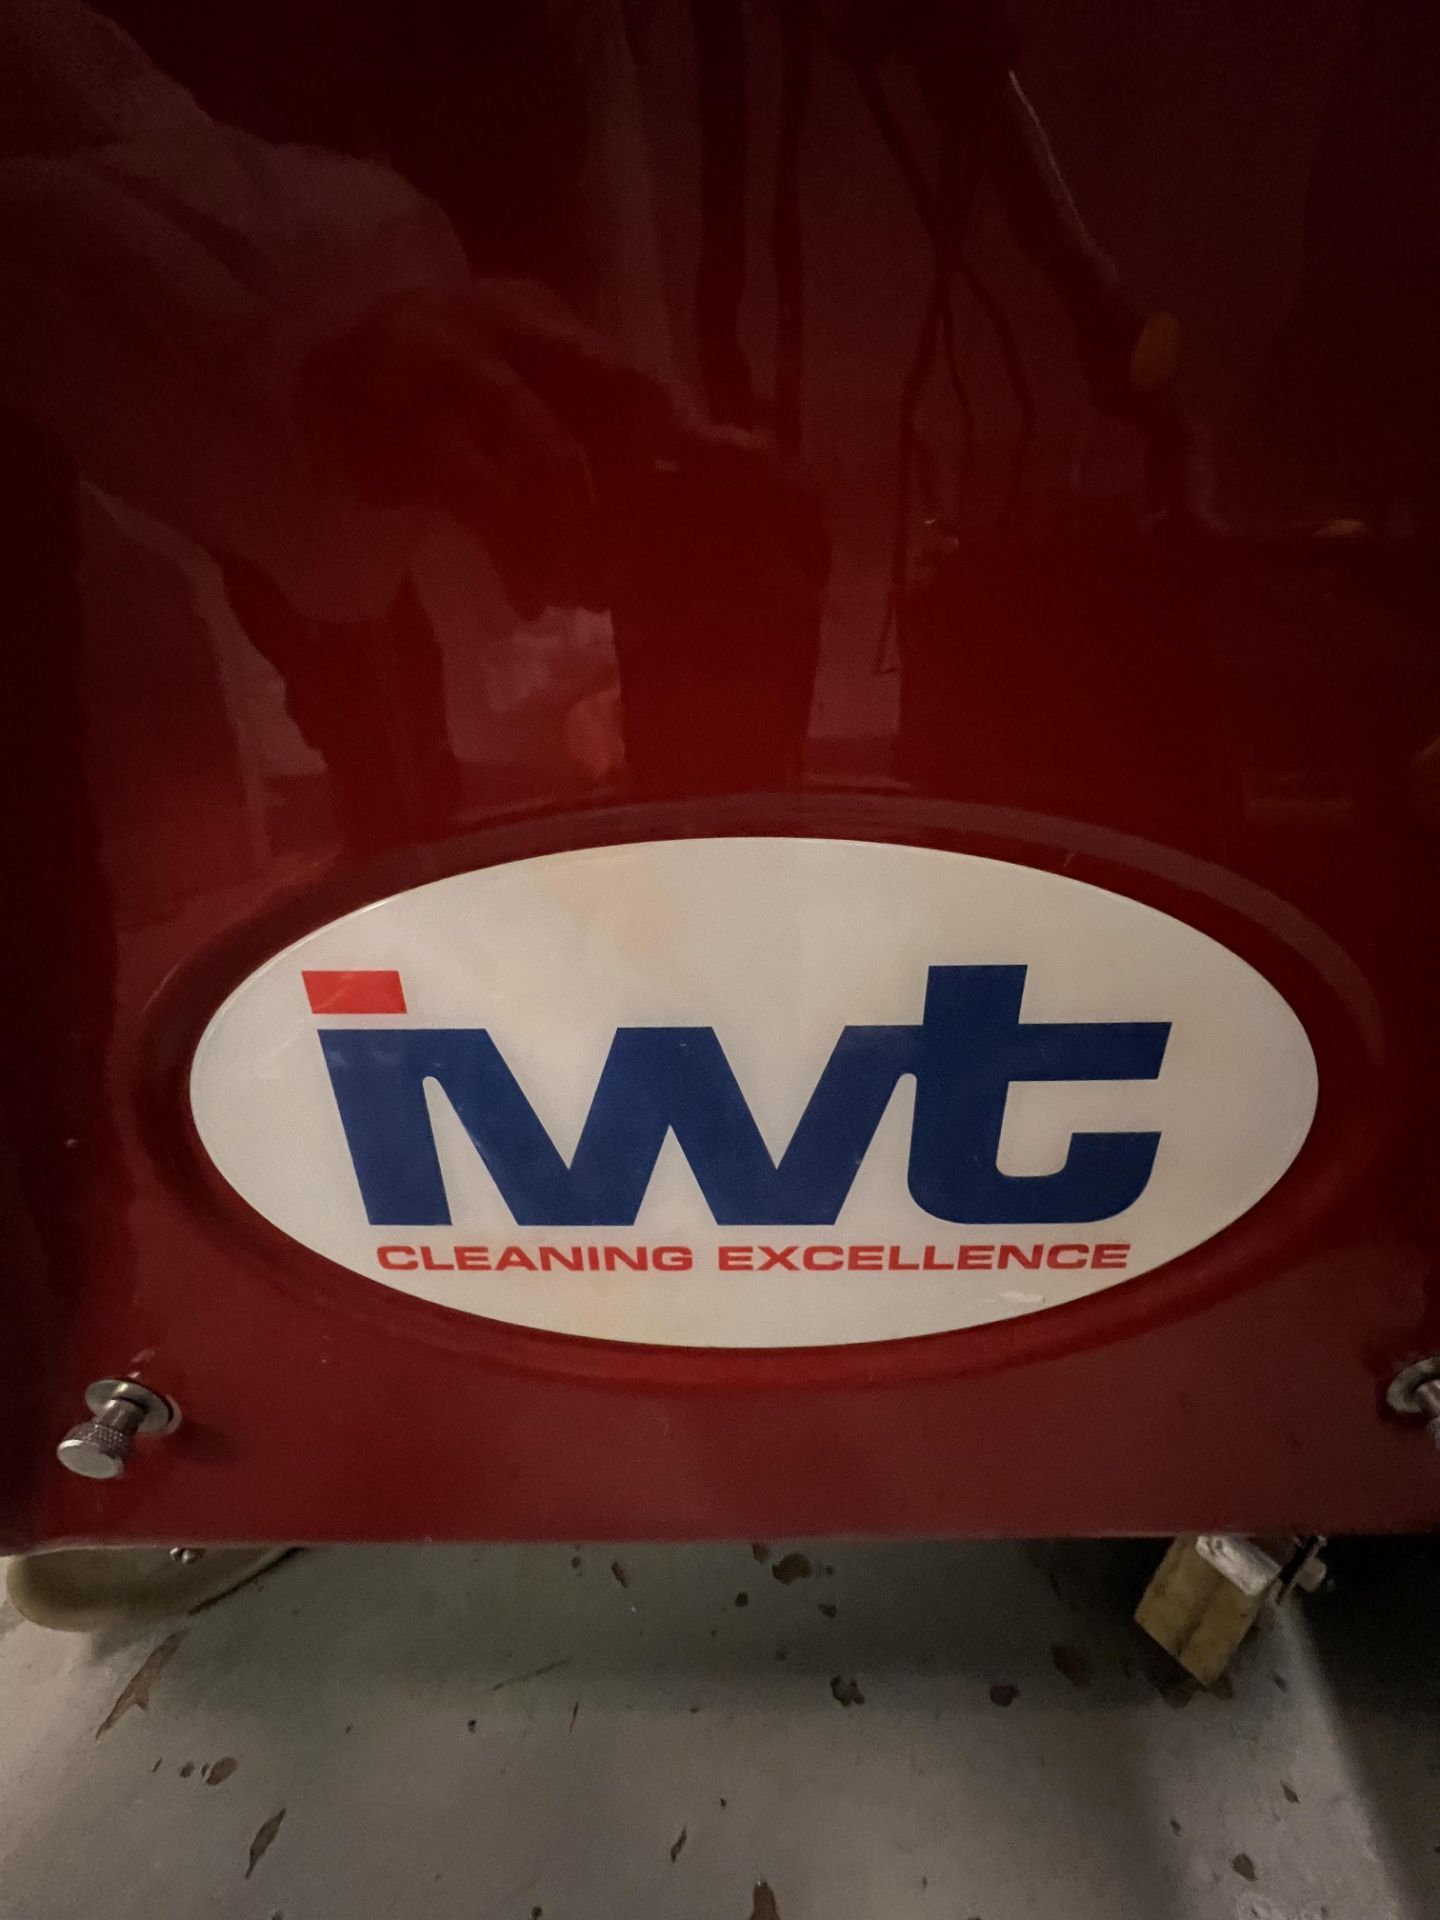 2019 IWT CLEANING EXCELLENCE CIP HP MOBILE WASHER 040, MODEL 9HPMS40, S/N 151152 - Image 2 of 27